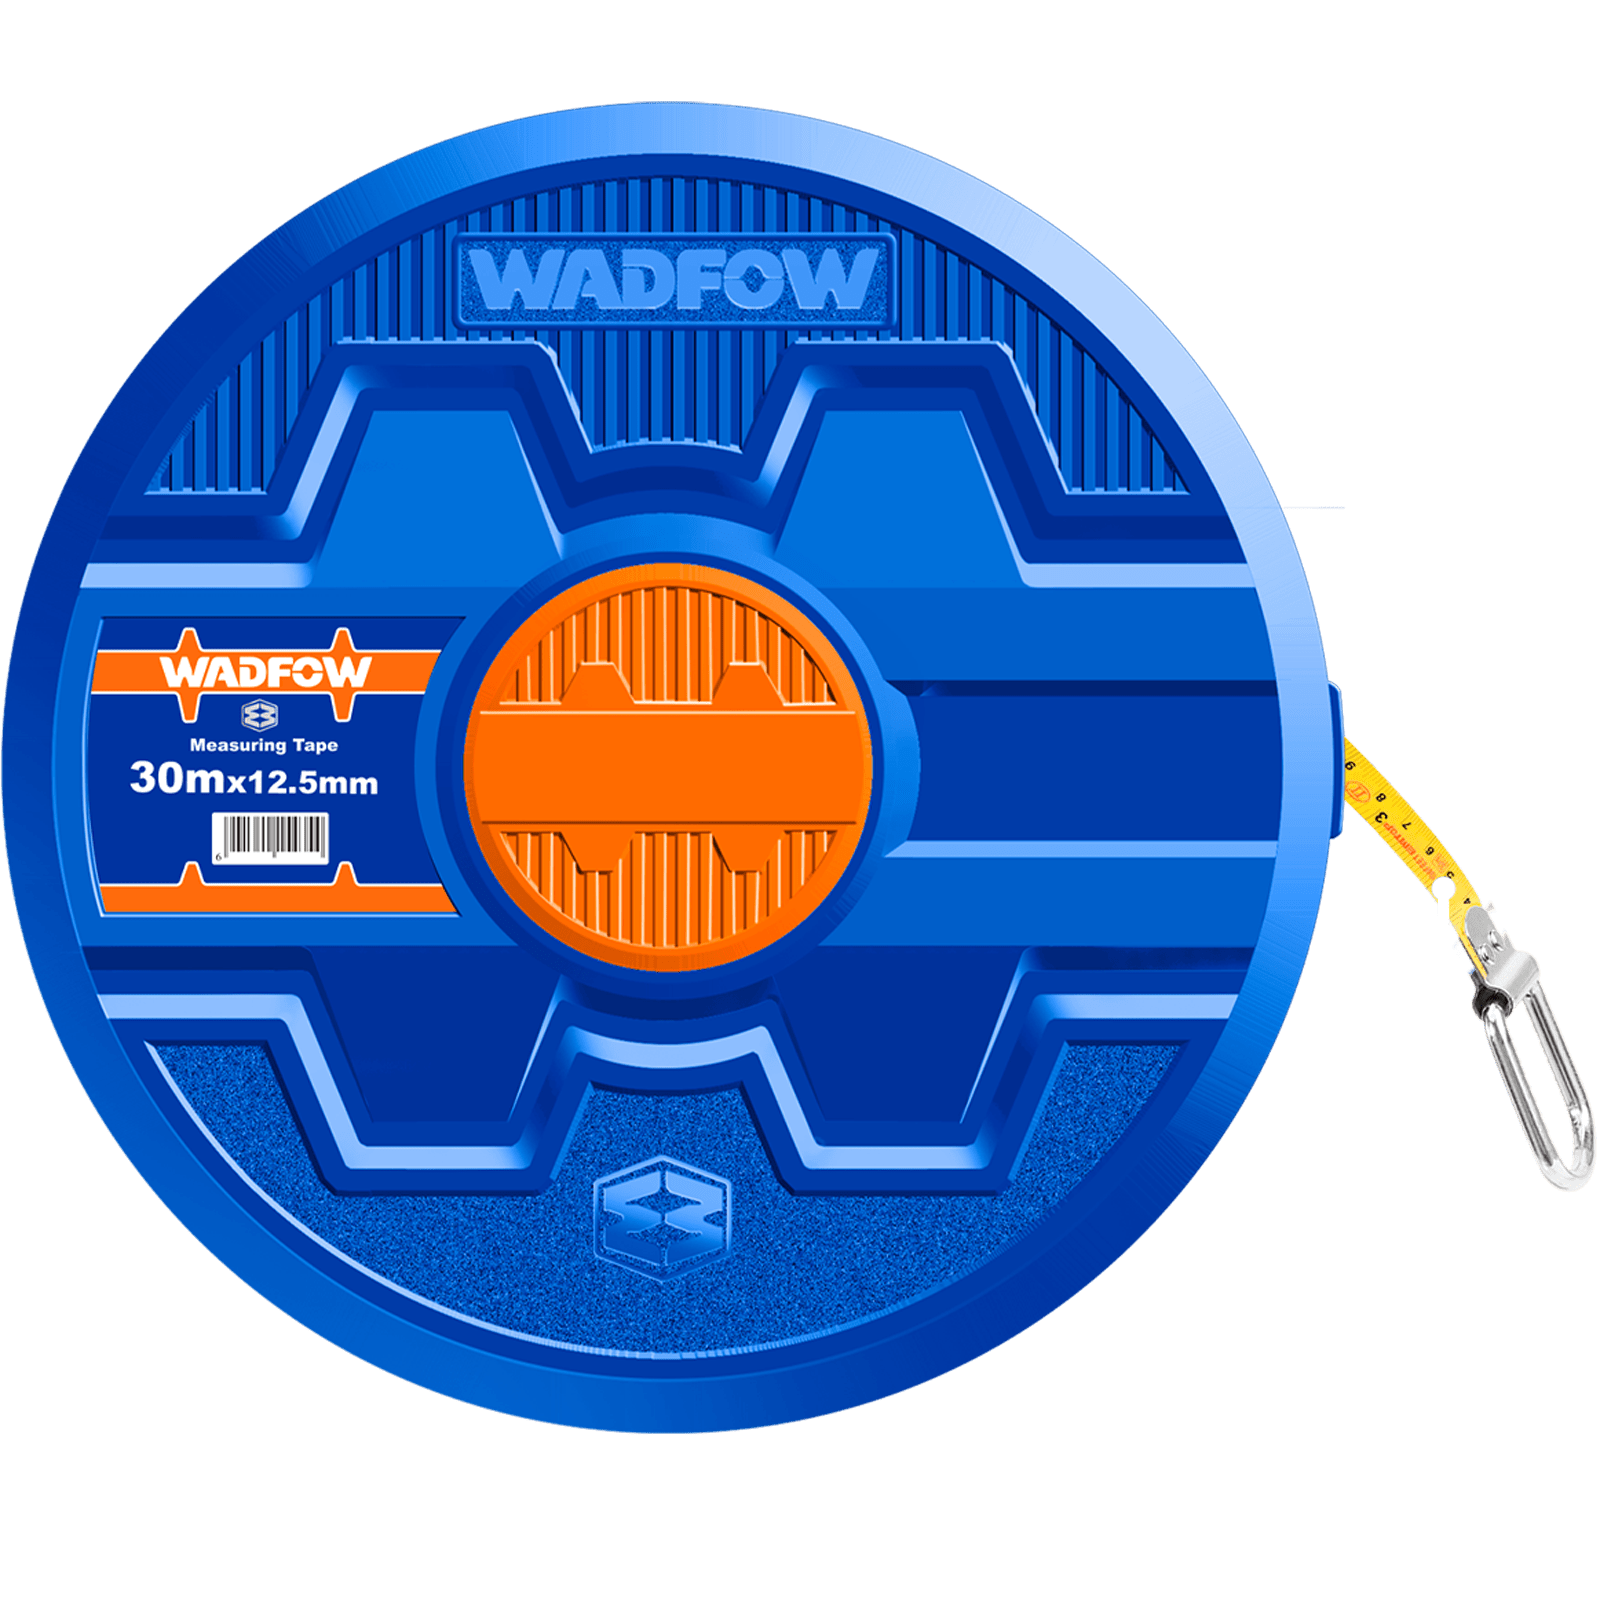 Buy Wadfow Steel Measuring Tape 20m x 12.5mm in Accra, Ghana | Supply Master Tape Measure Buy Tools hardware Building materials